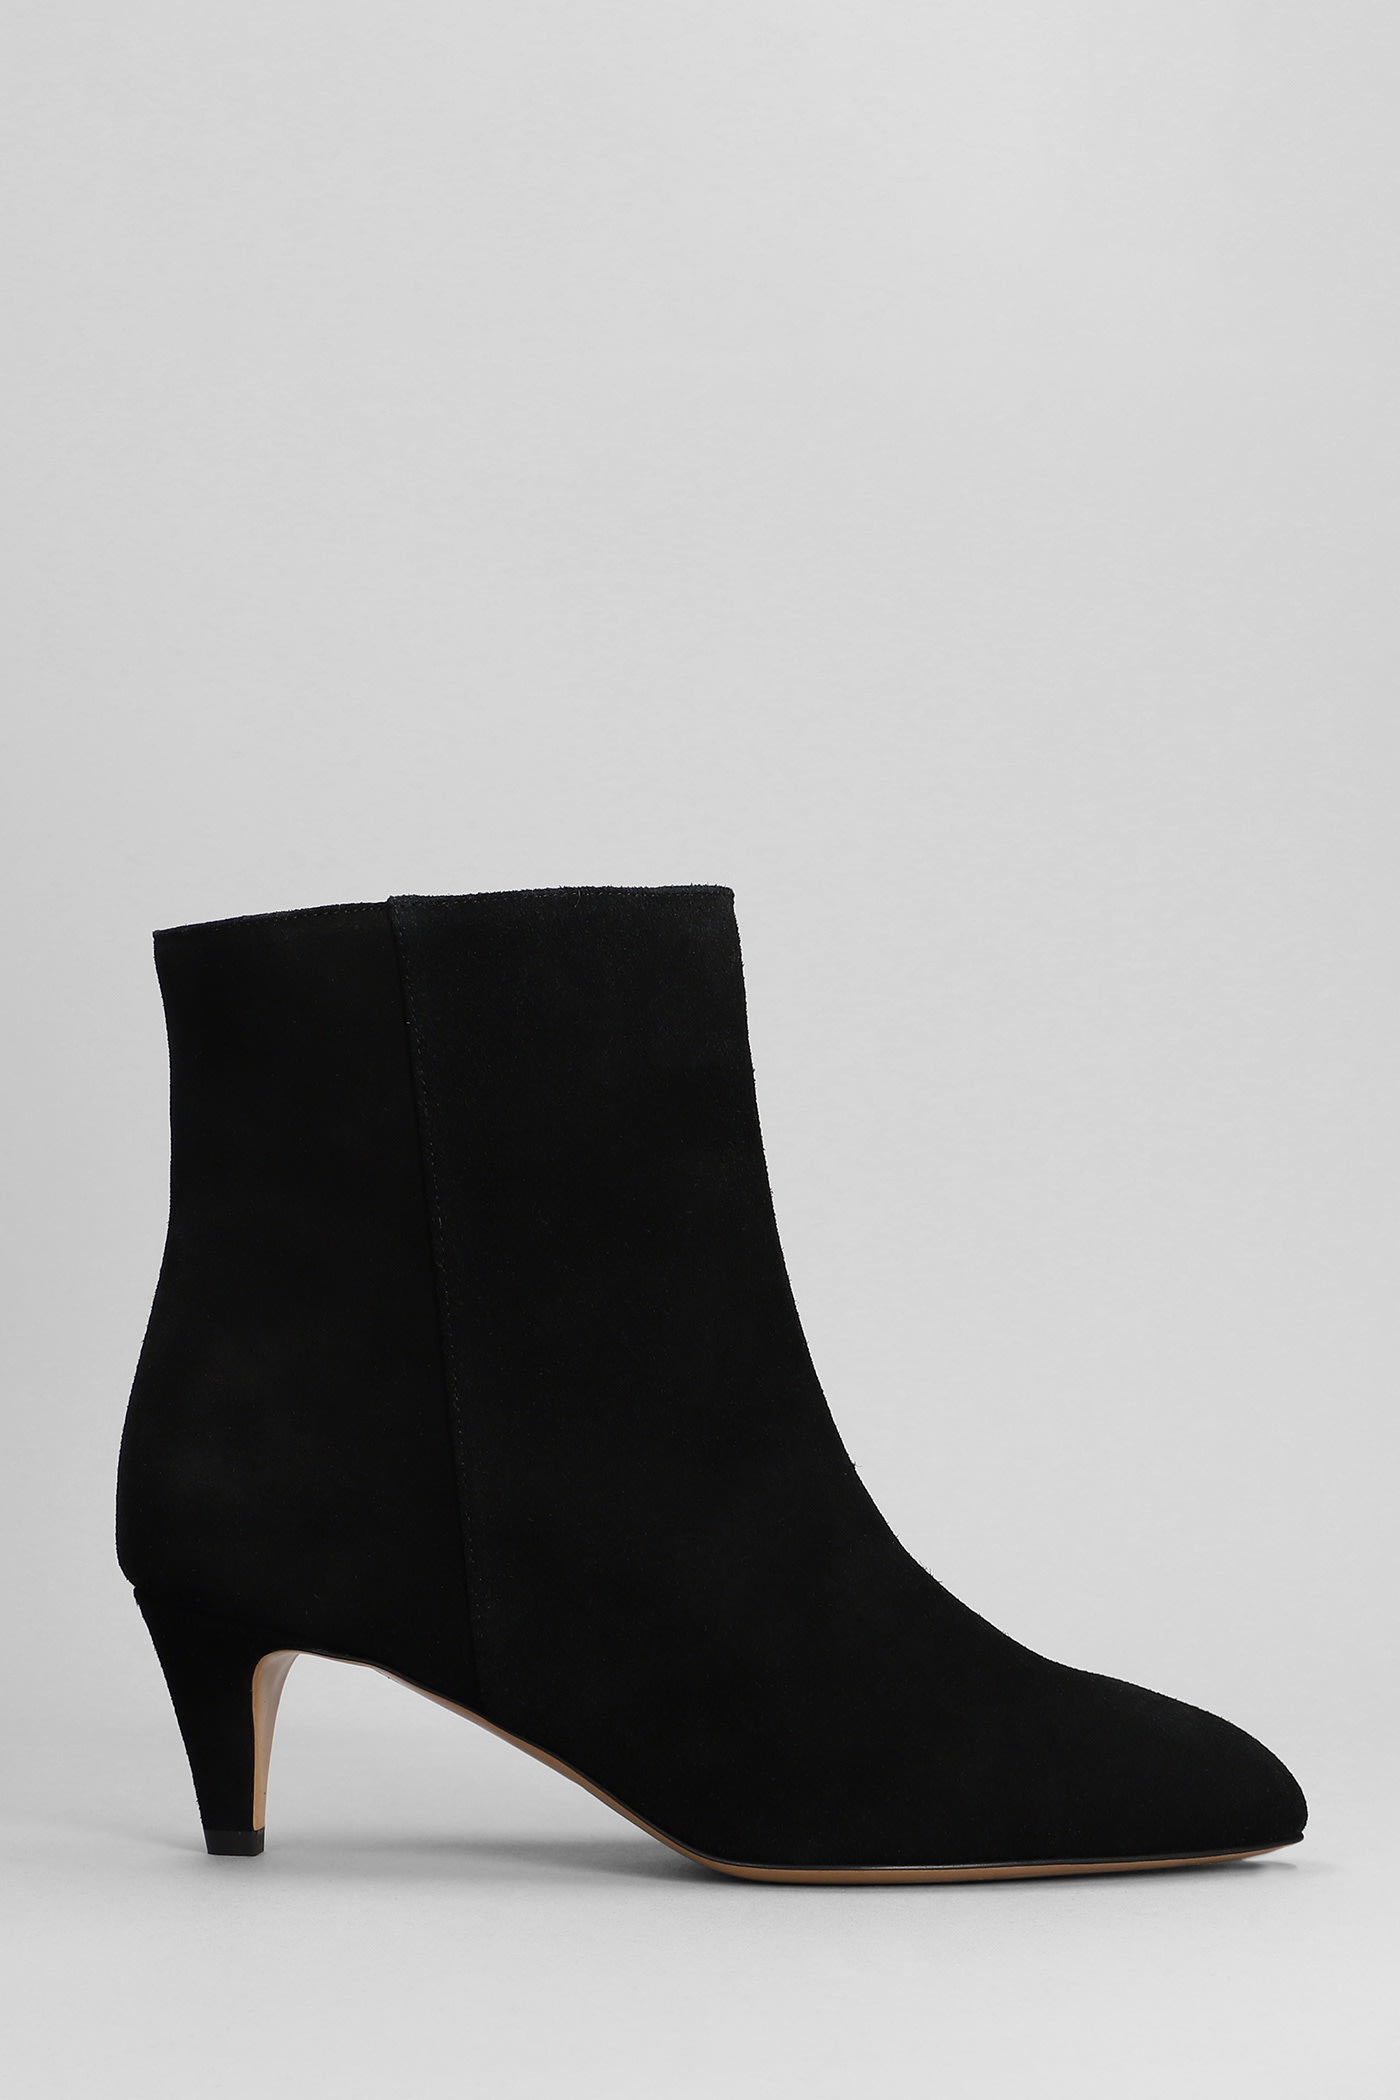 Isabel Marant Daxi Low Heels Ankle Boots In Black Suede